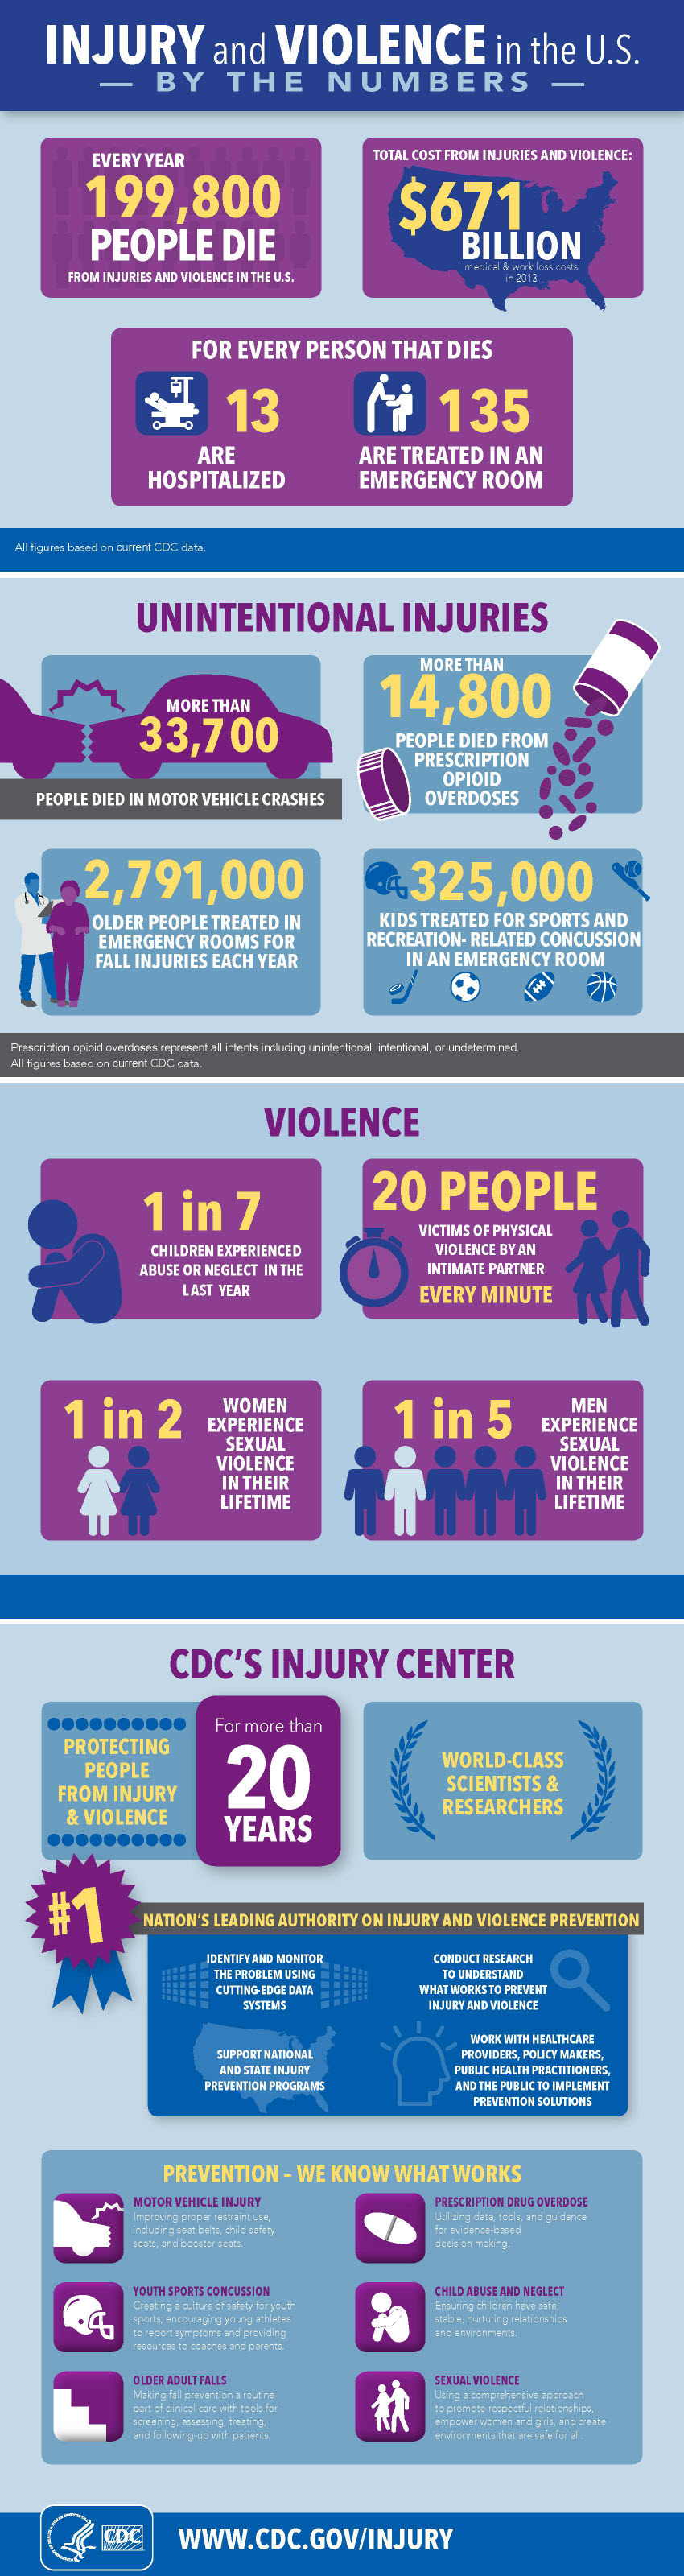 	Injury and Violence in the U.S. by the Numbers